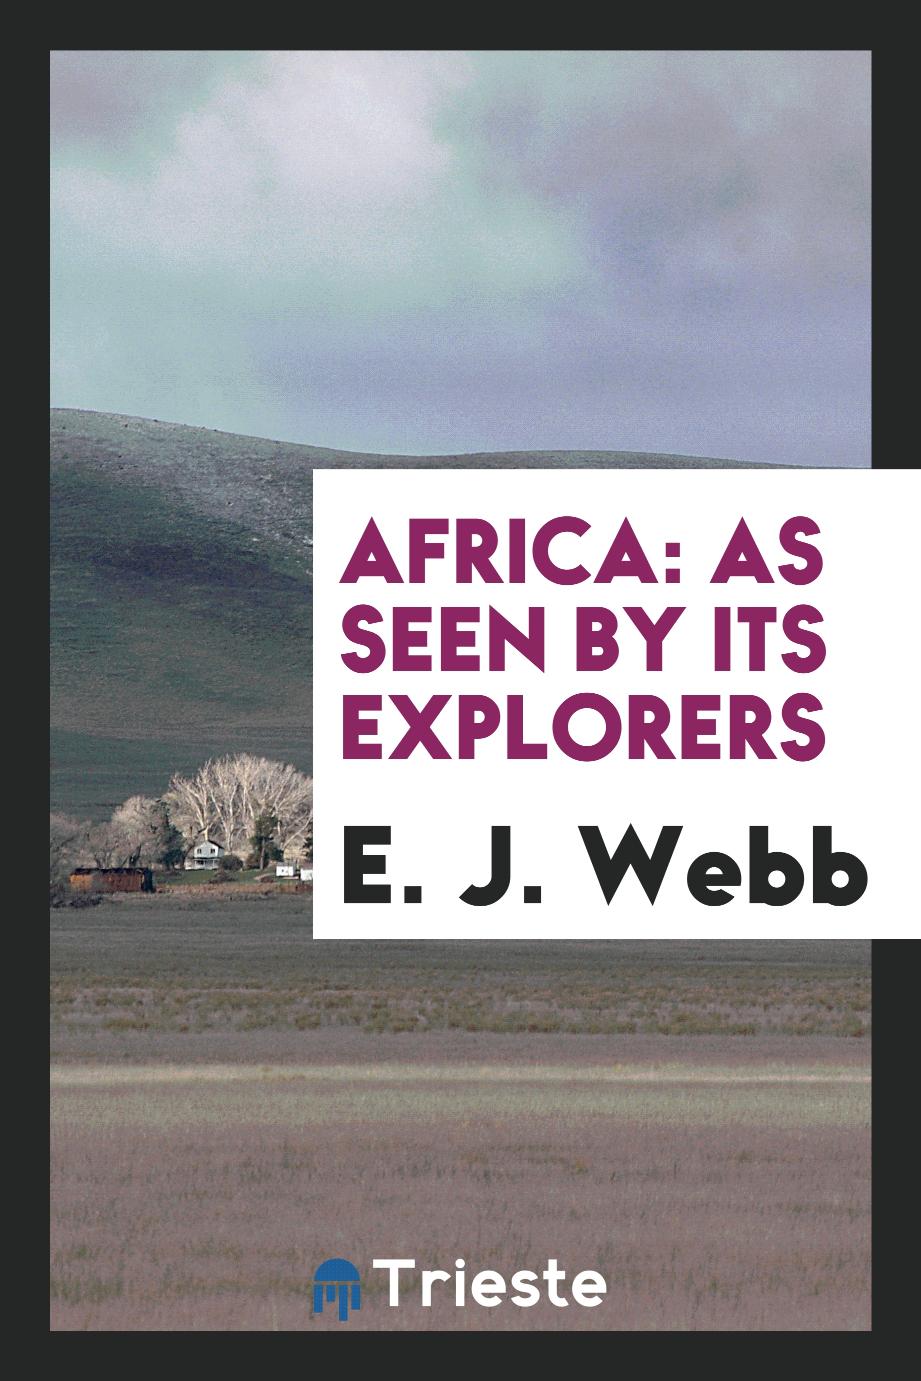 Africa: as seen by its explorers